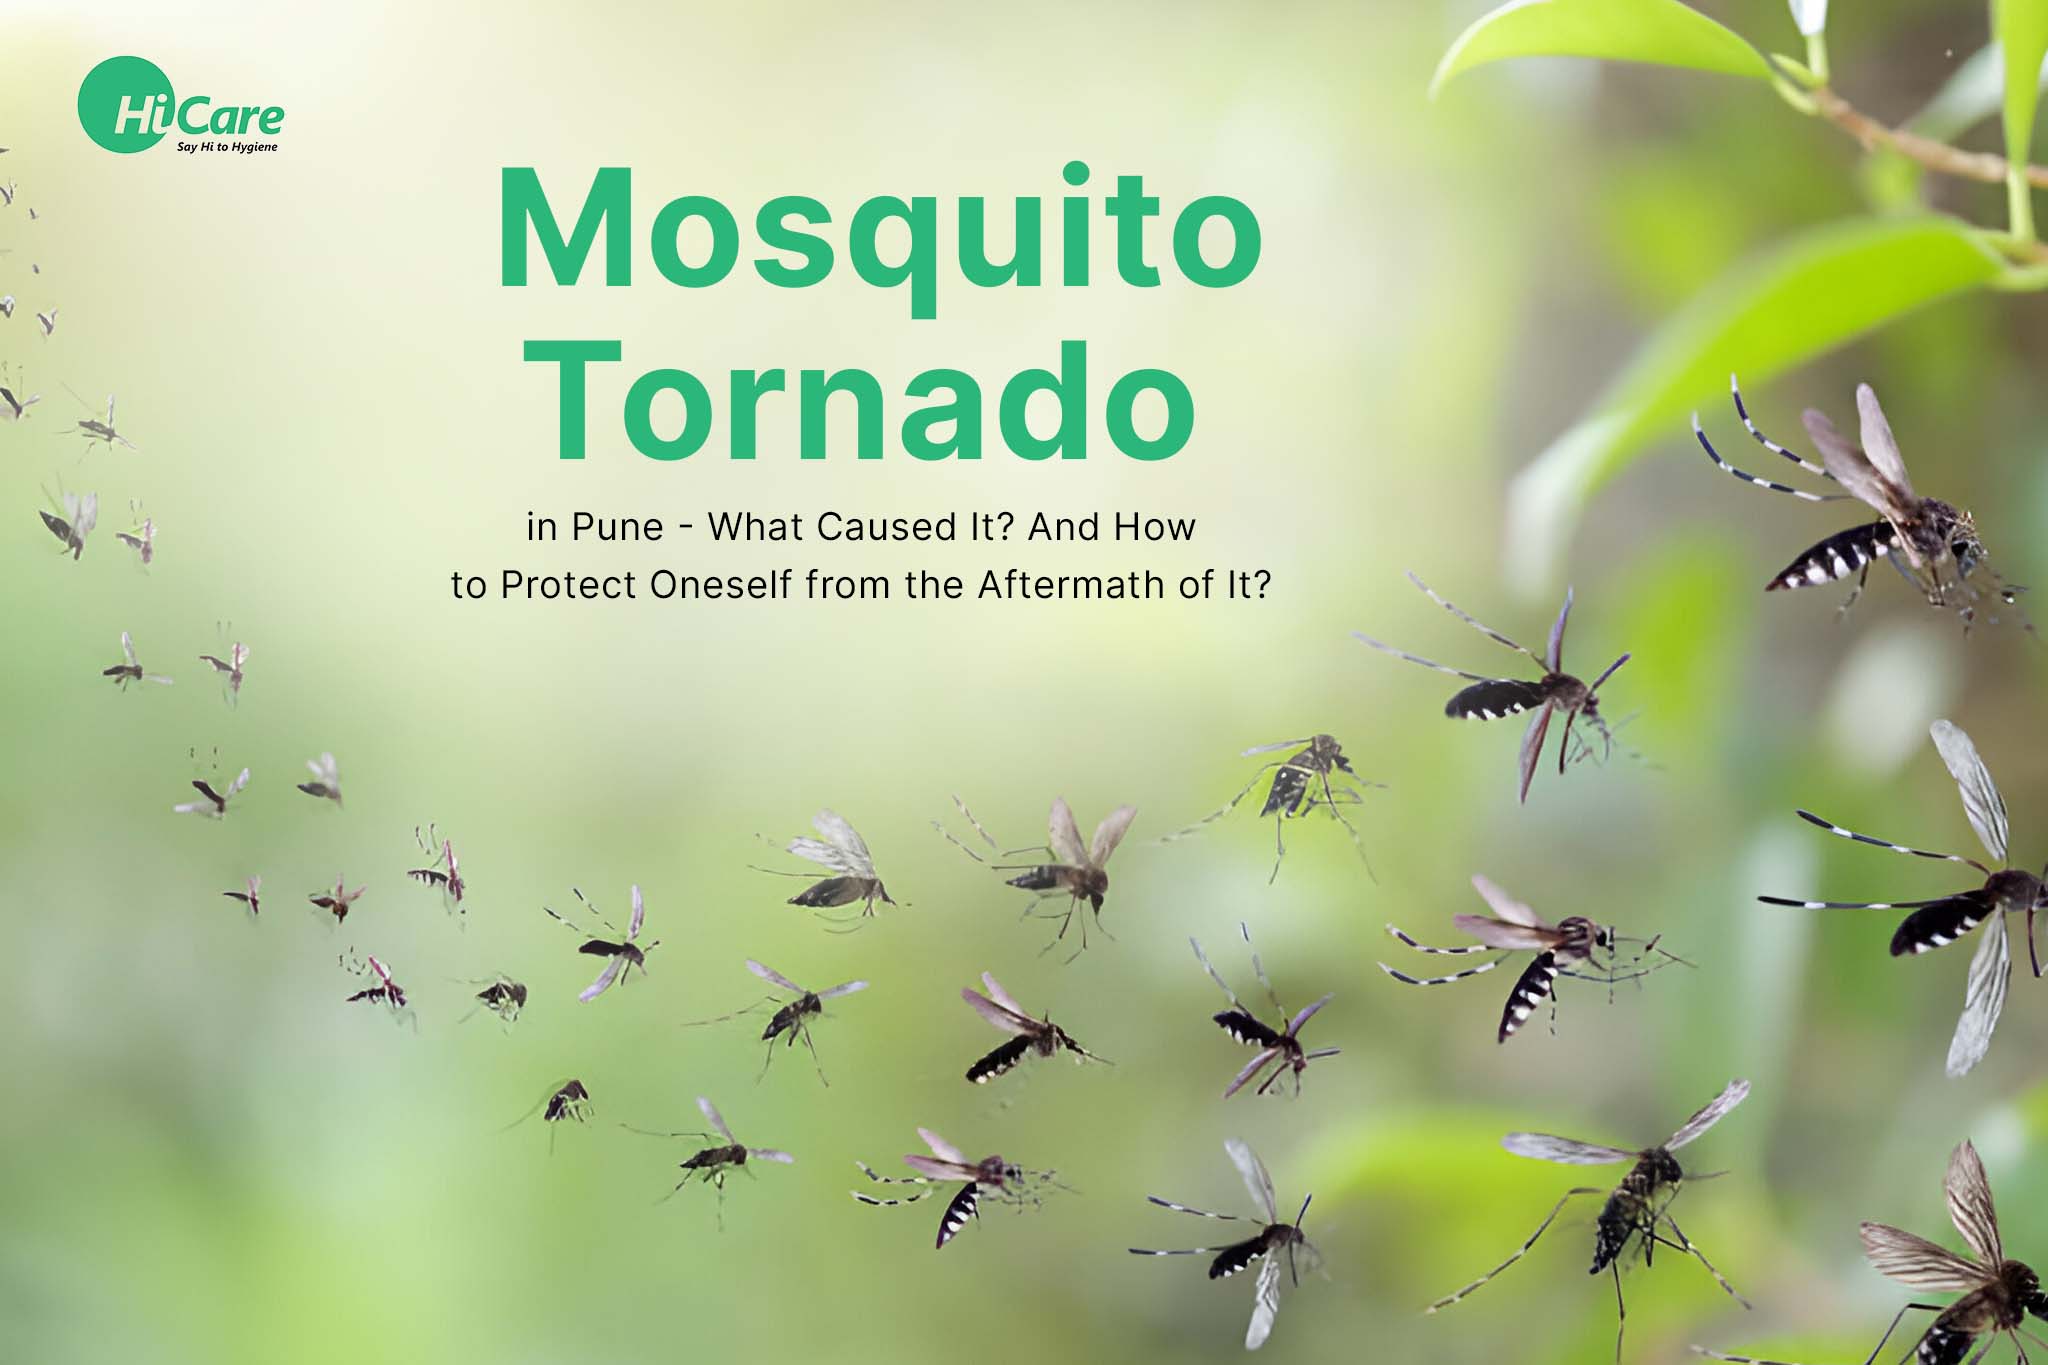 Mosquito Tornado in Pune – What Caused it? And How to Protect Oneself from the Aftermath of it.